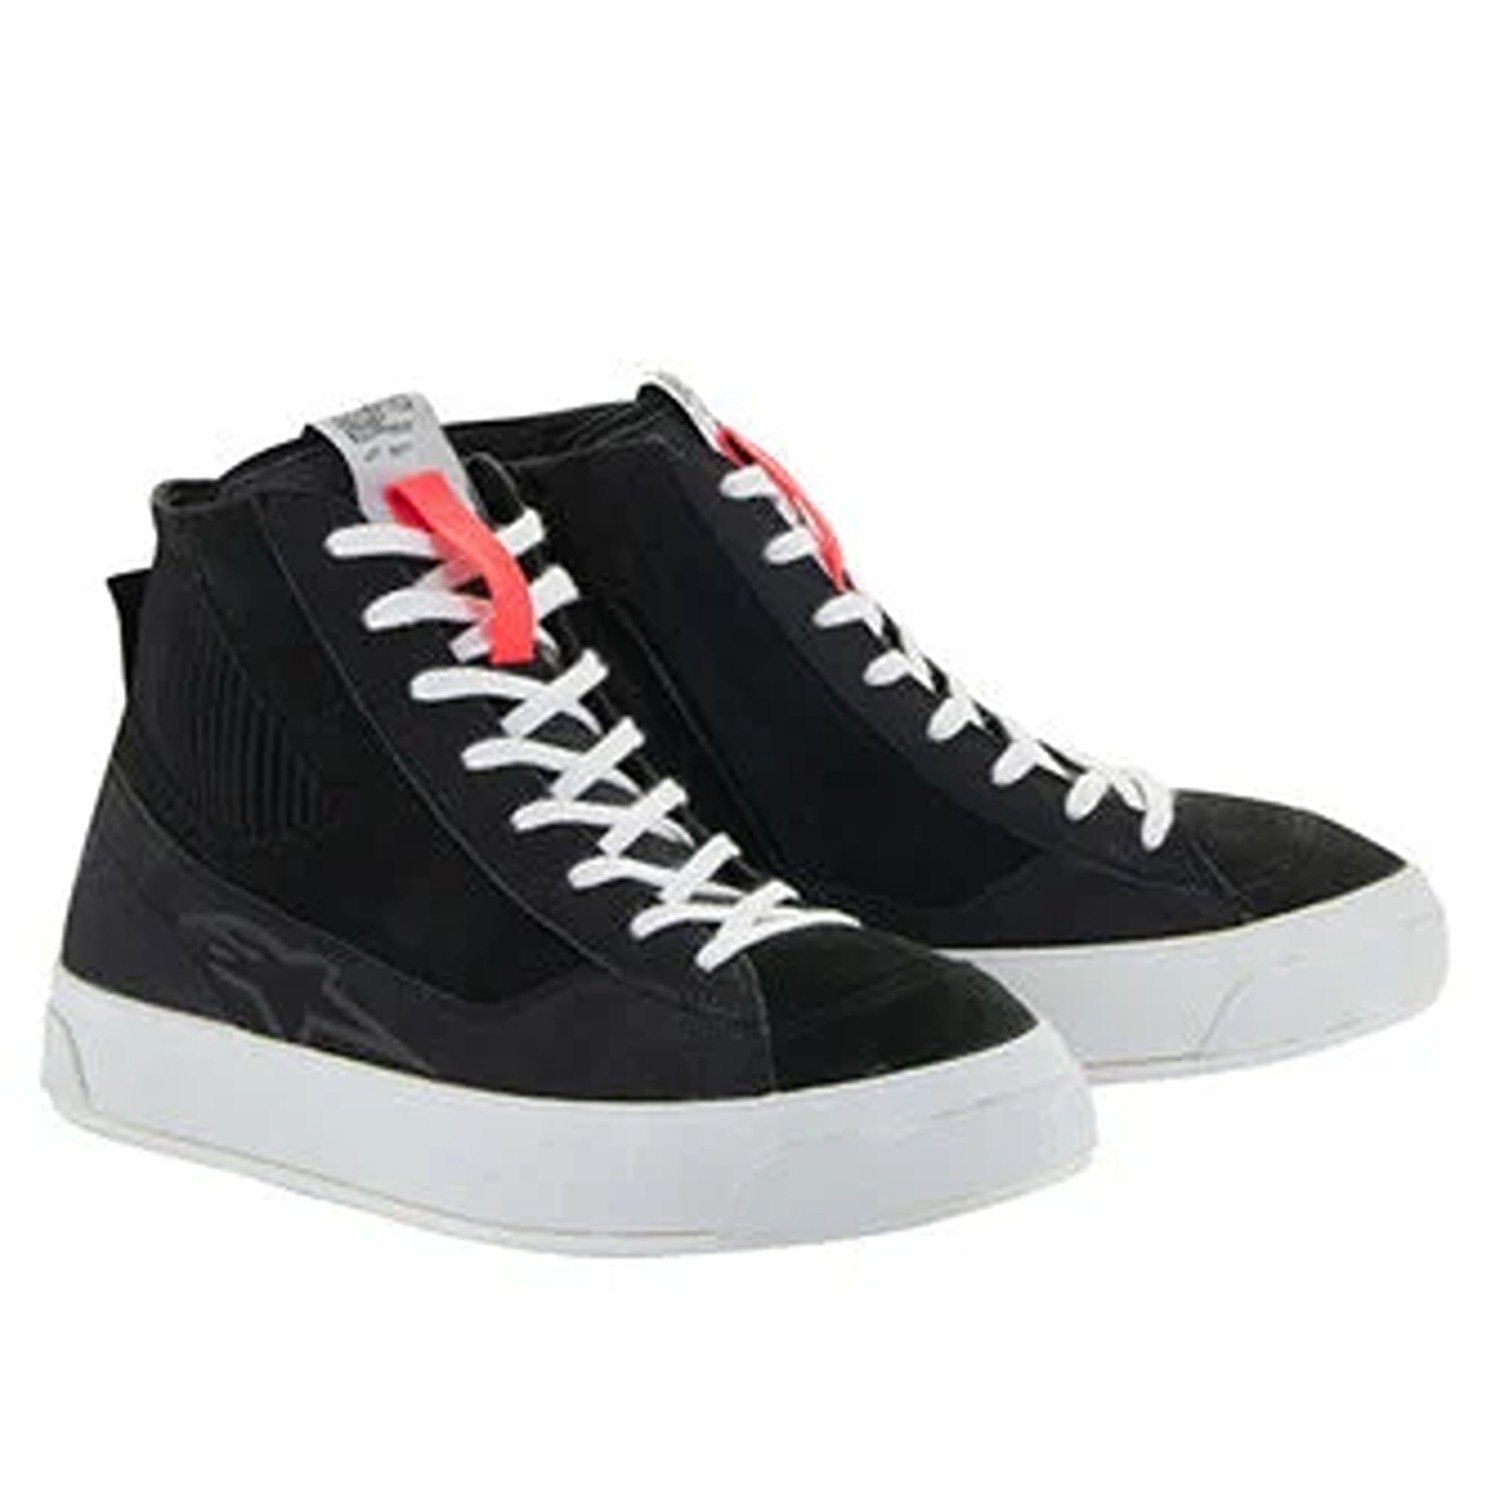 Image of EU Alpinestars Stated Shoes Black Taille US 6